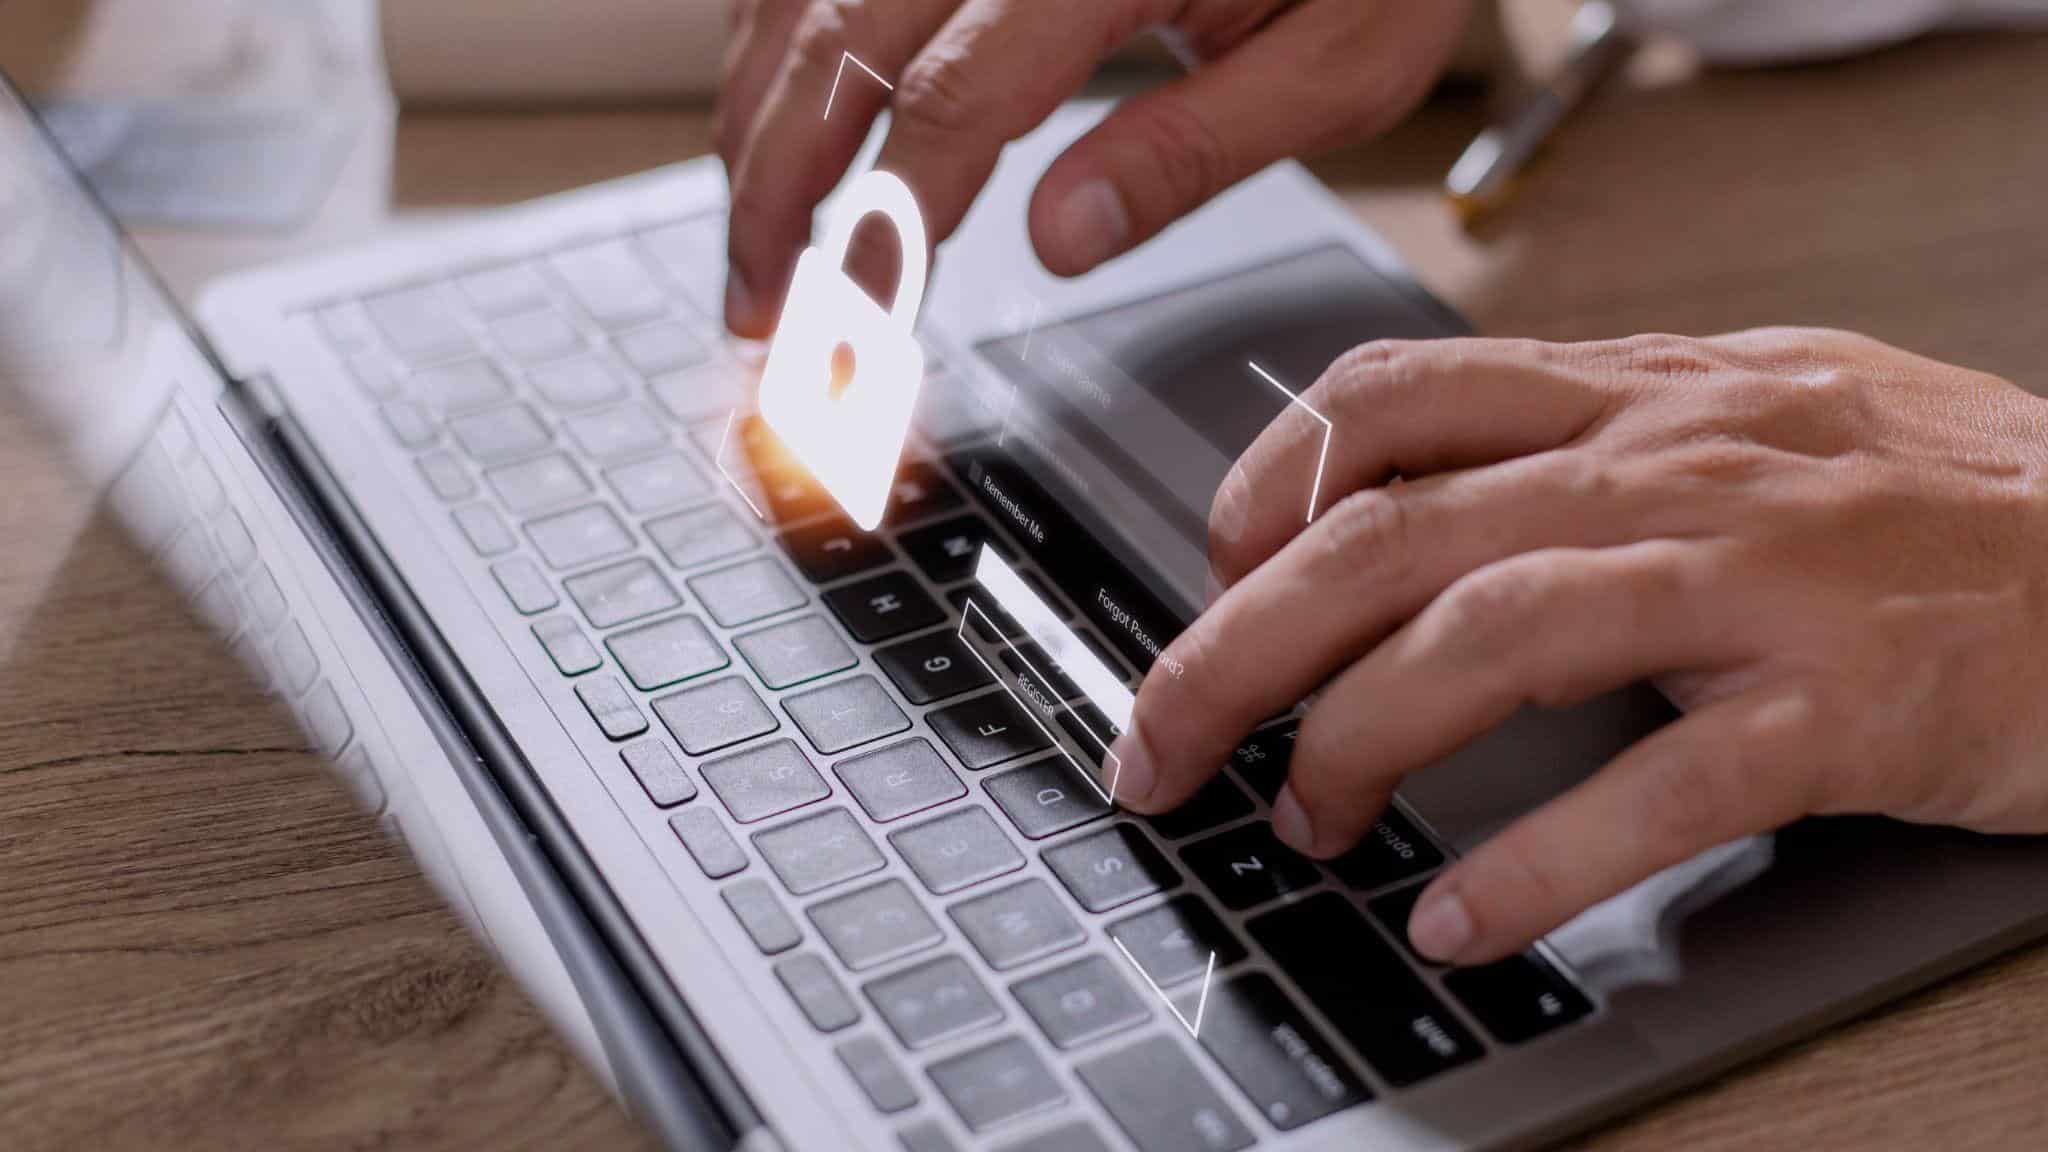 A laptop keyboard with a lock and login projected above depicting cybersecurity.